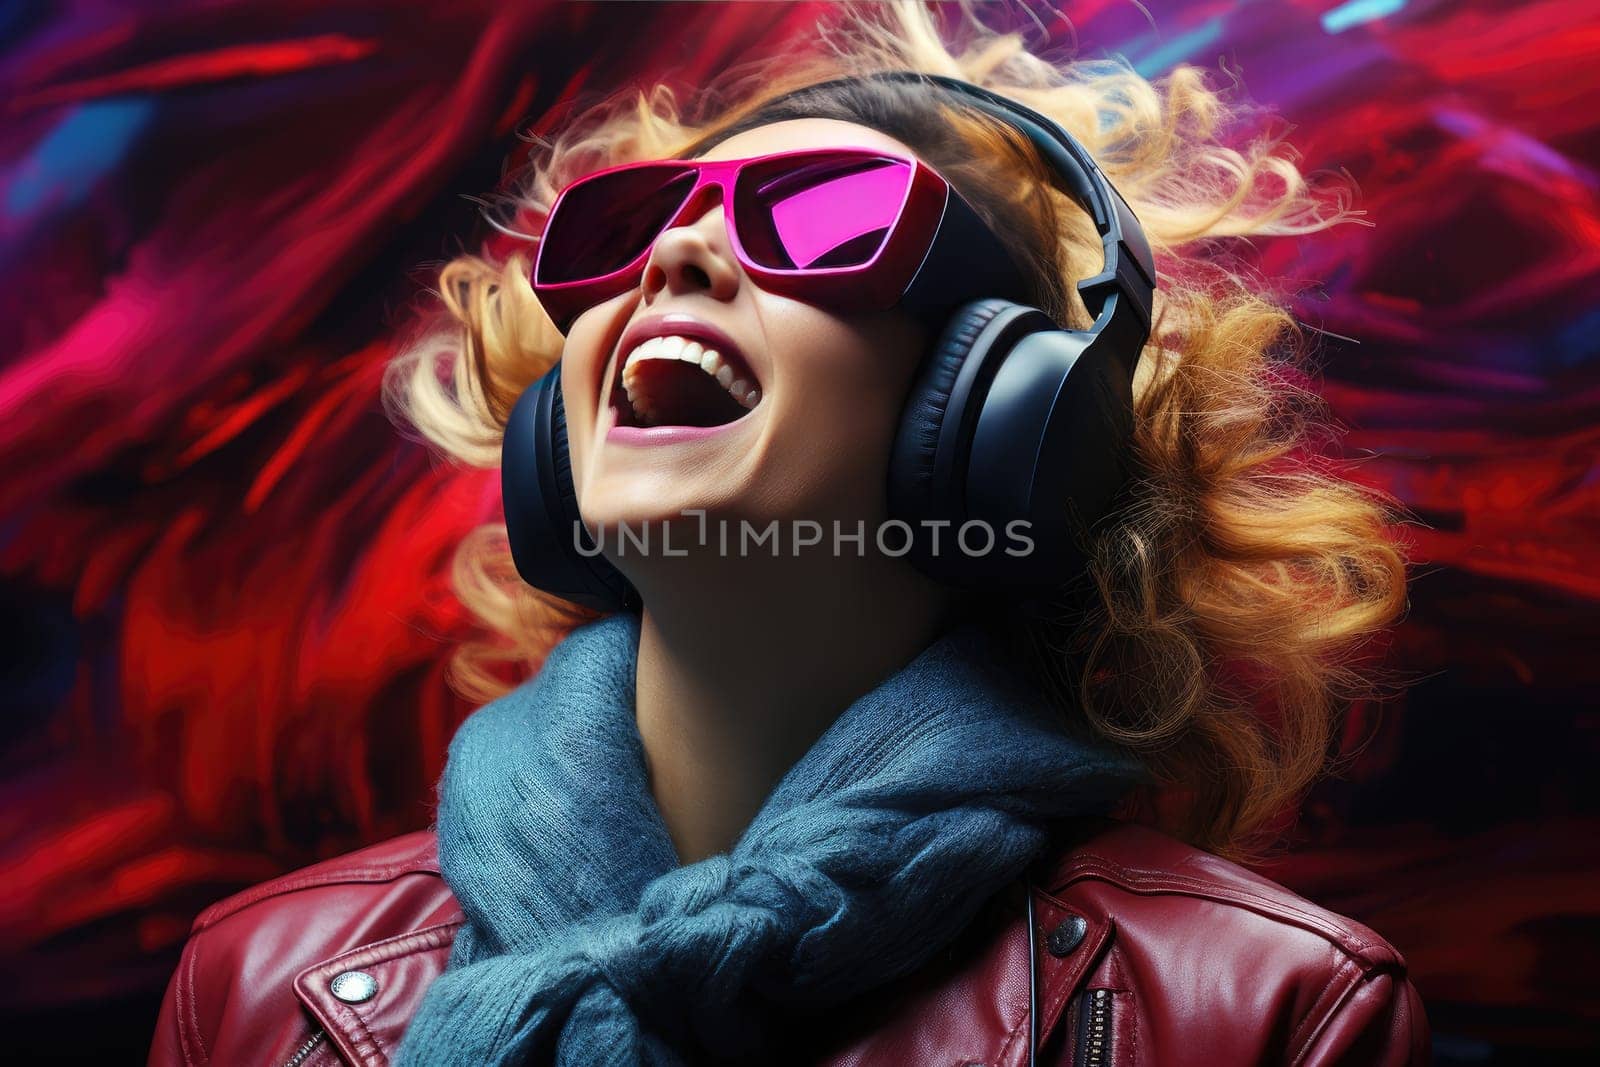 Modern woman immersed in virtual reality with electronic amplification headset by Yurich32